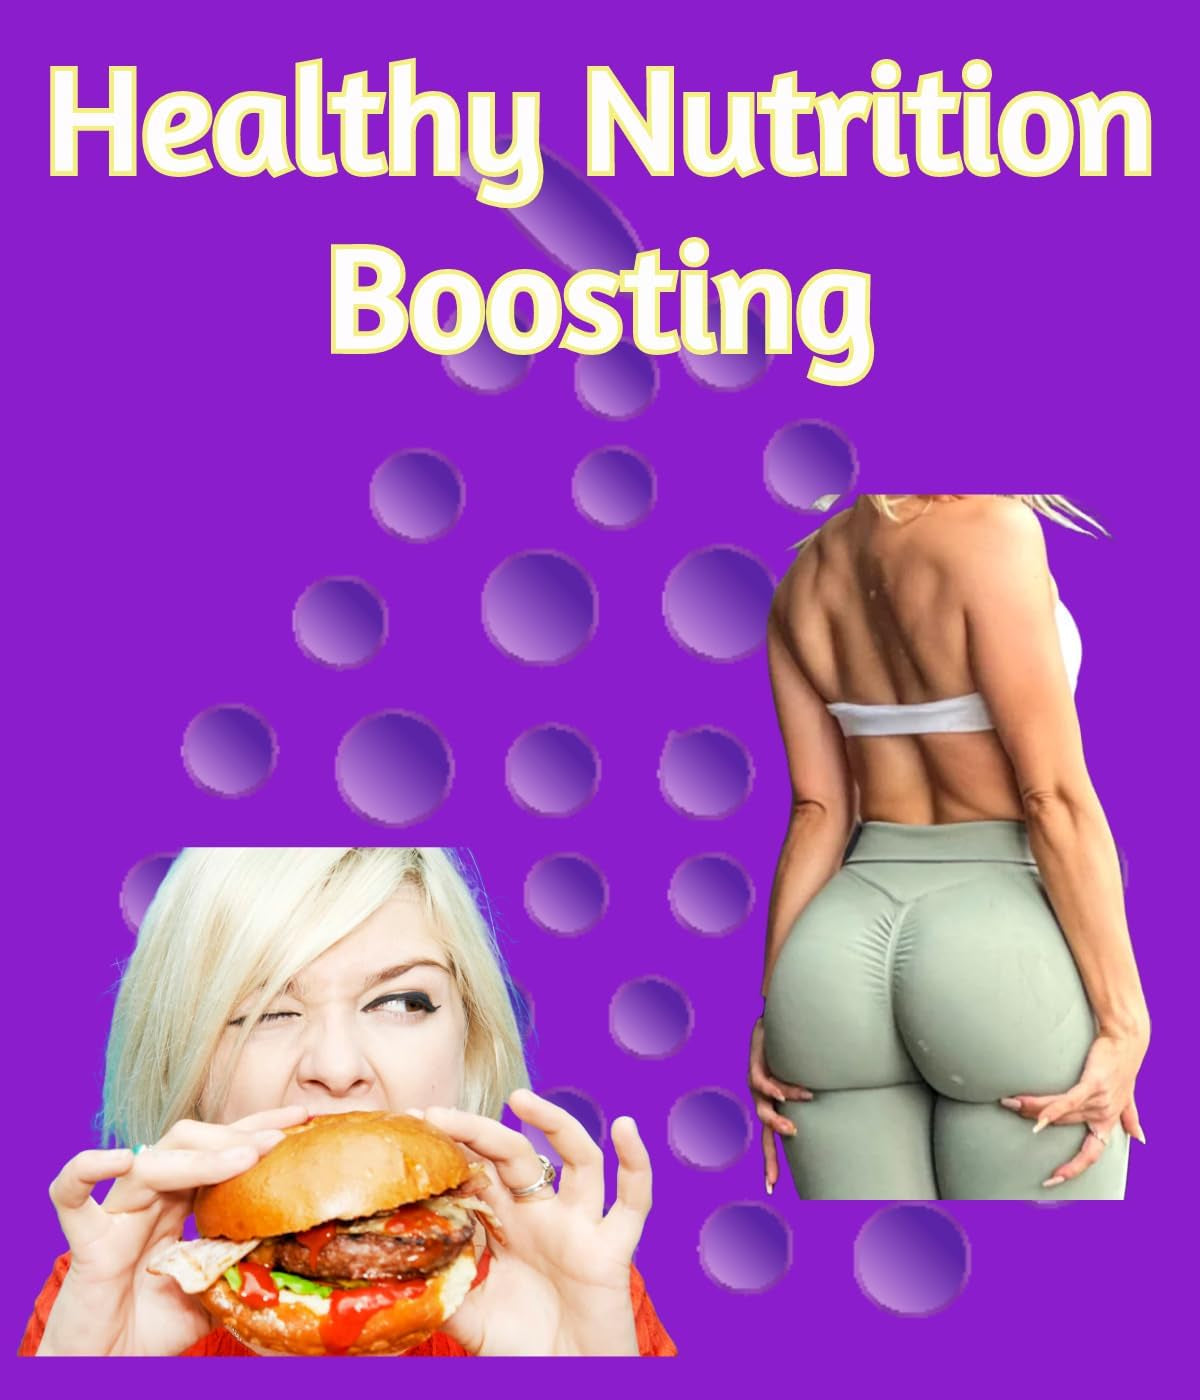 "Apetasin Blended Multivitamin and Minerals with Booty Building Support"